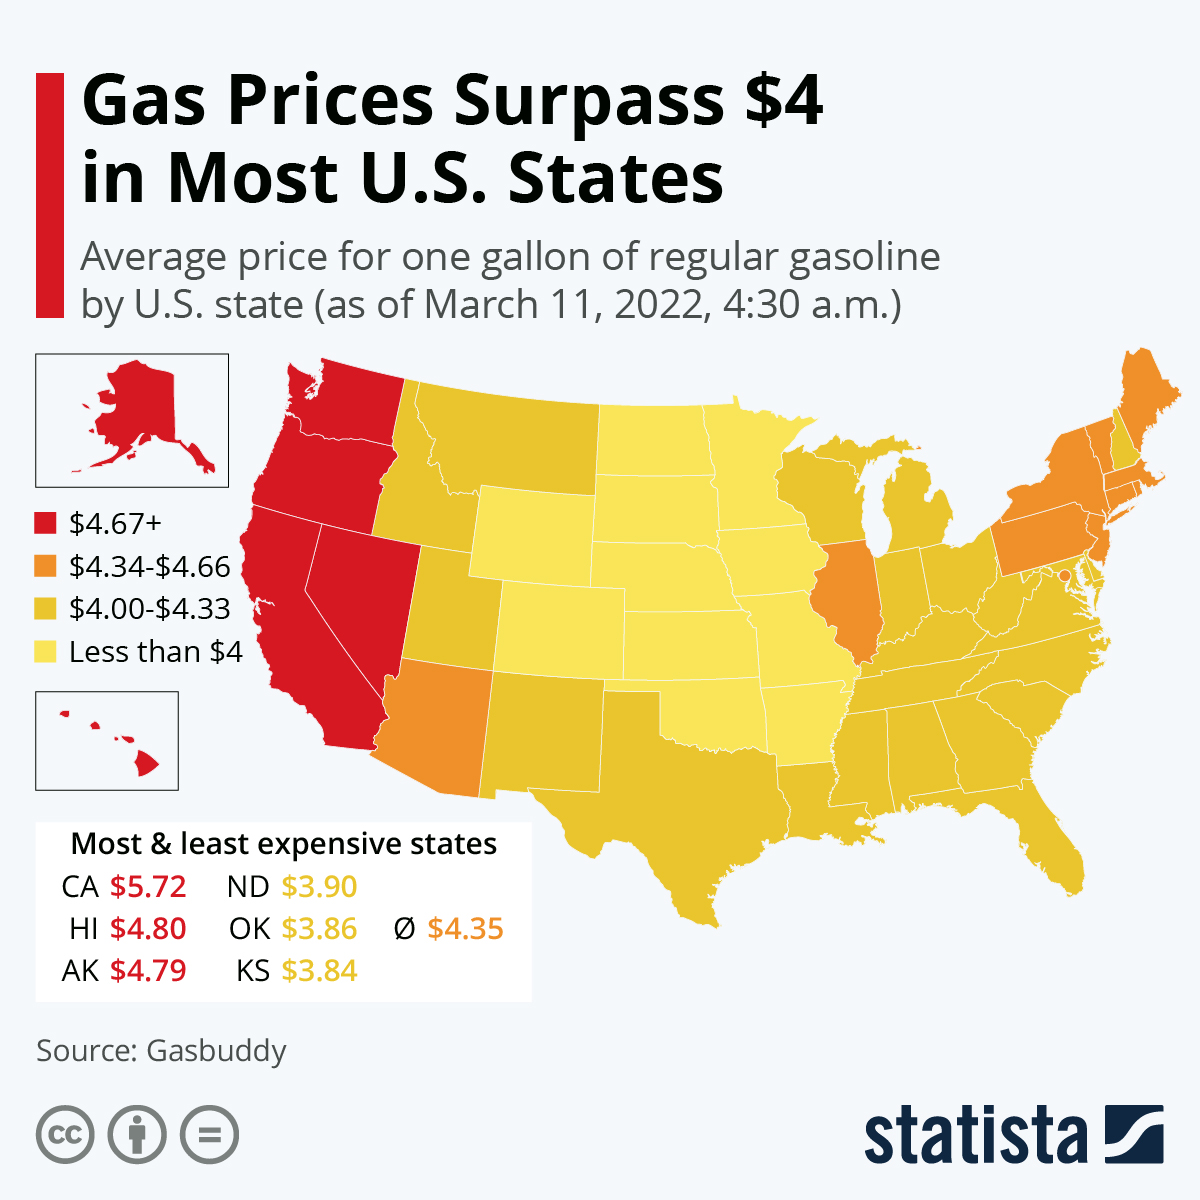 Gas Prices Surpass $4 in Most U.S. States